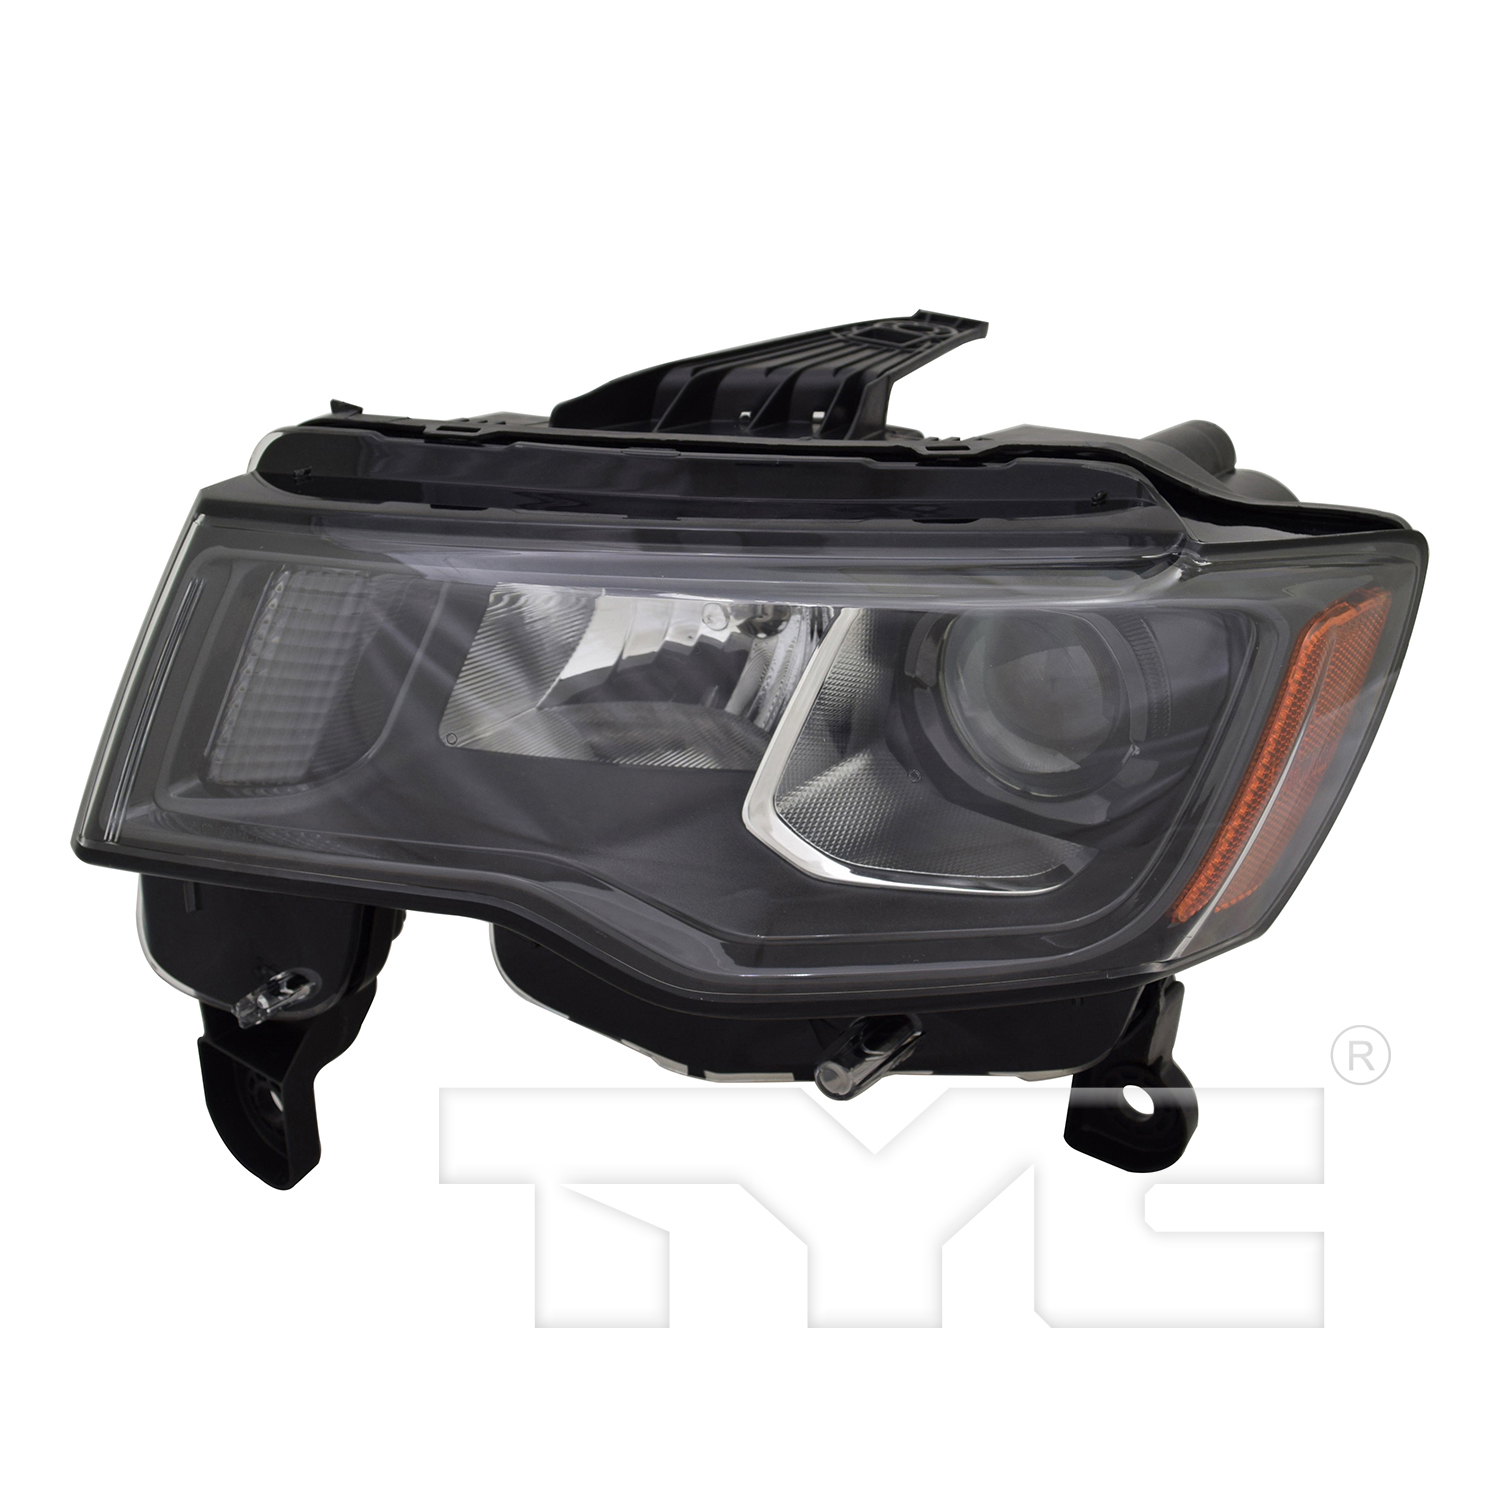 Aftermarket HEADLIGHTS for JEEP - GRAND CHEROKEE WK, GRAND CHEROKEE WK,22-22,LT Headlamp assy composite